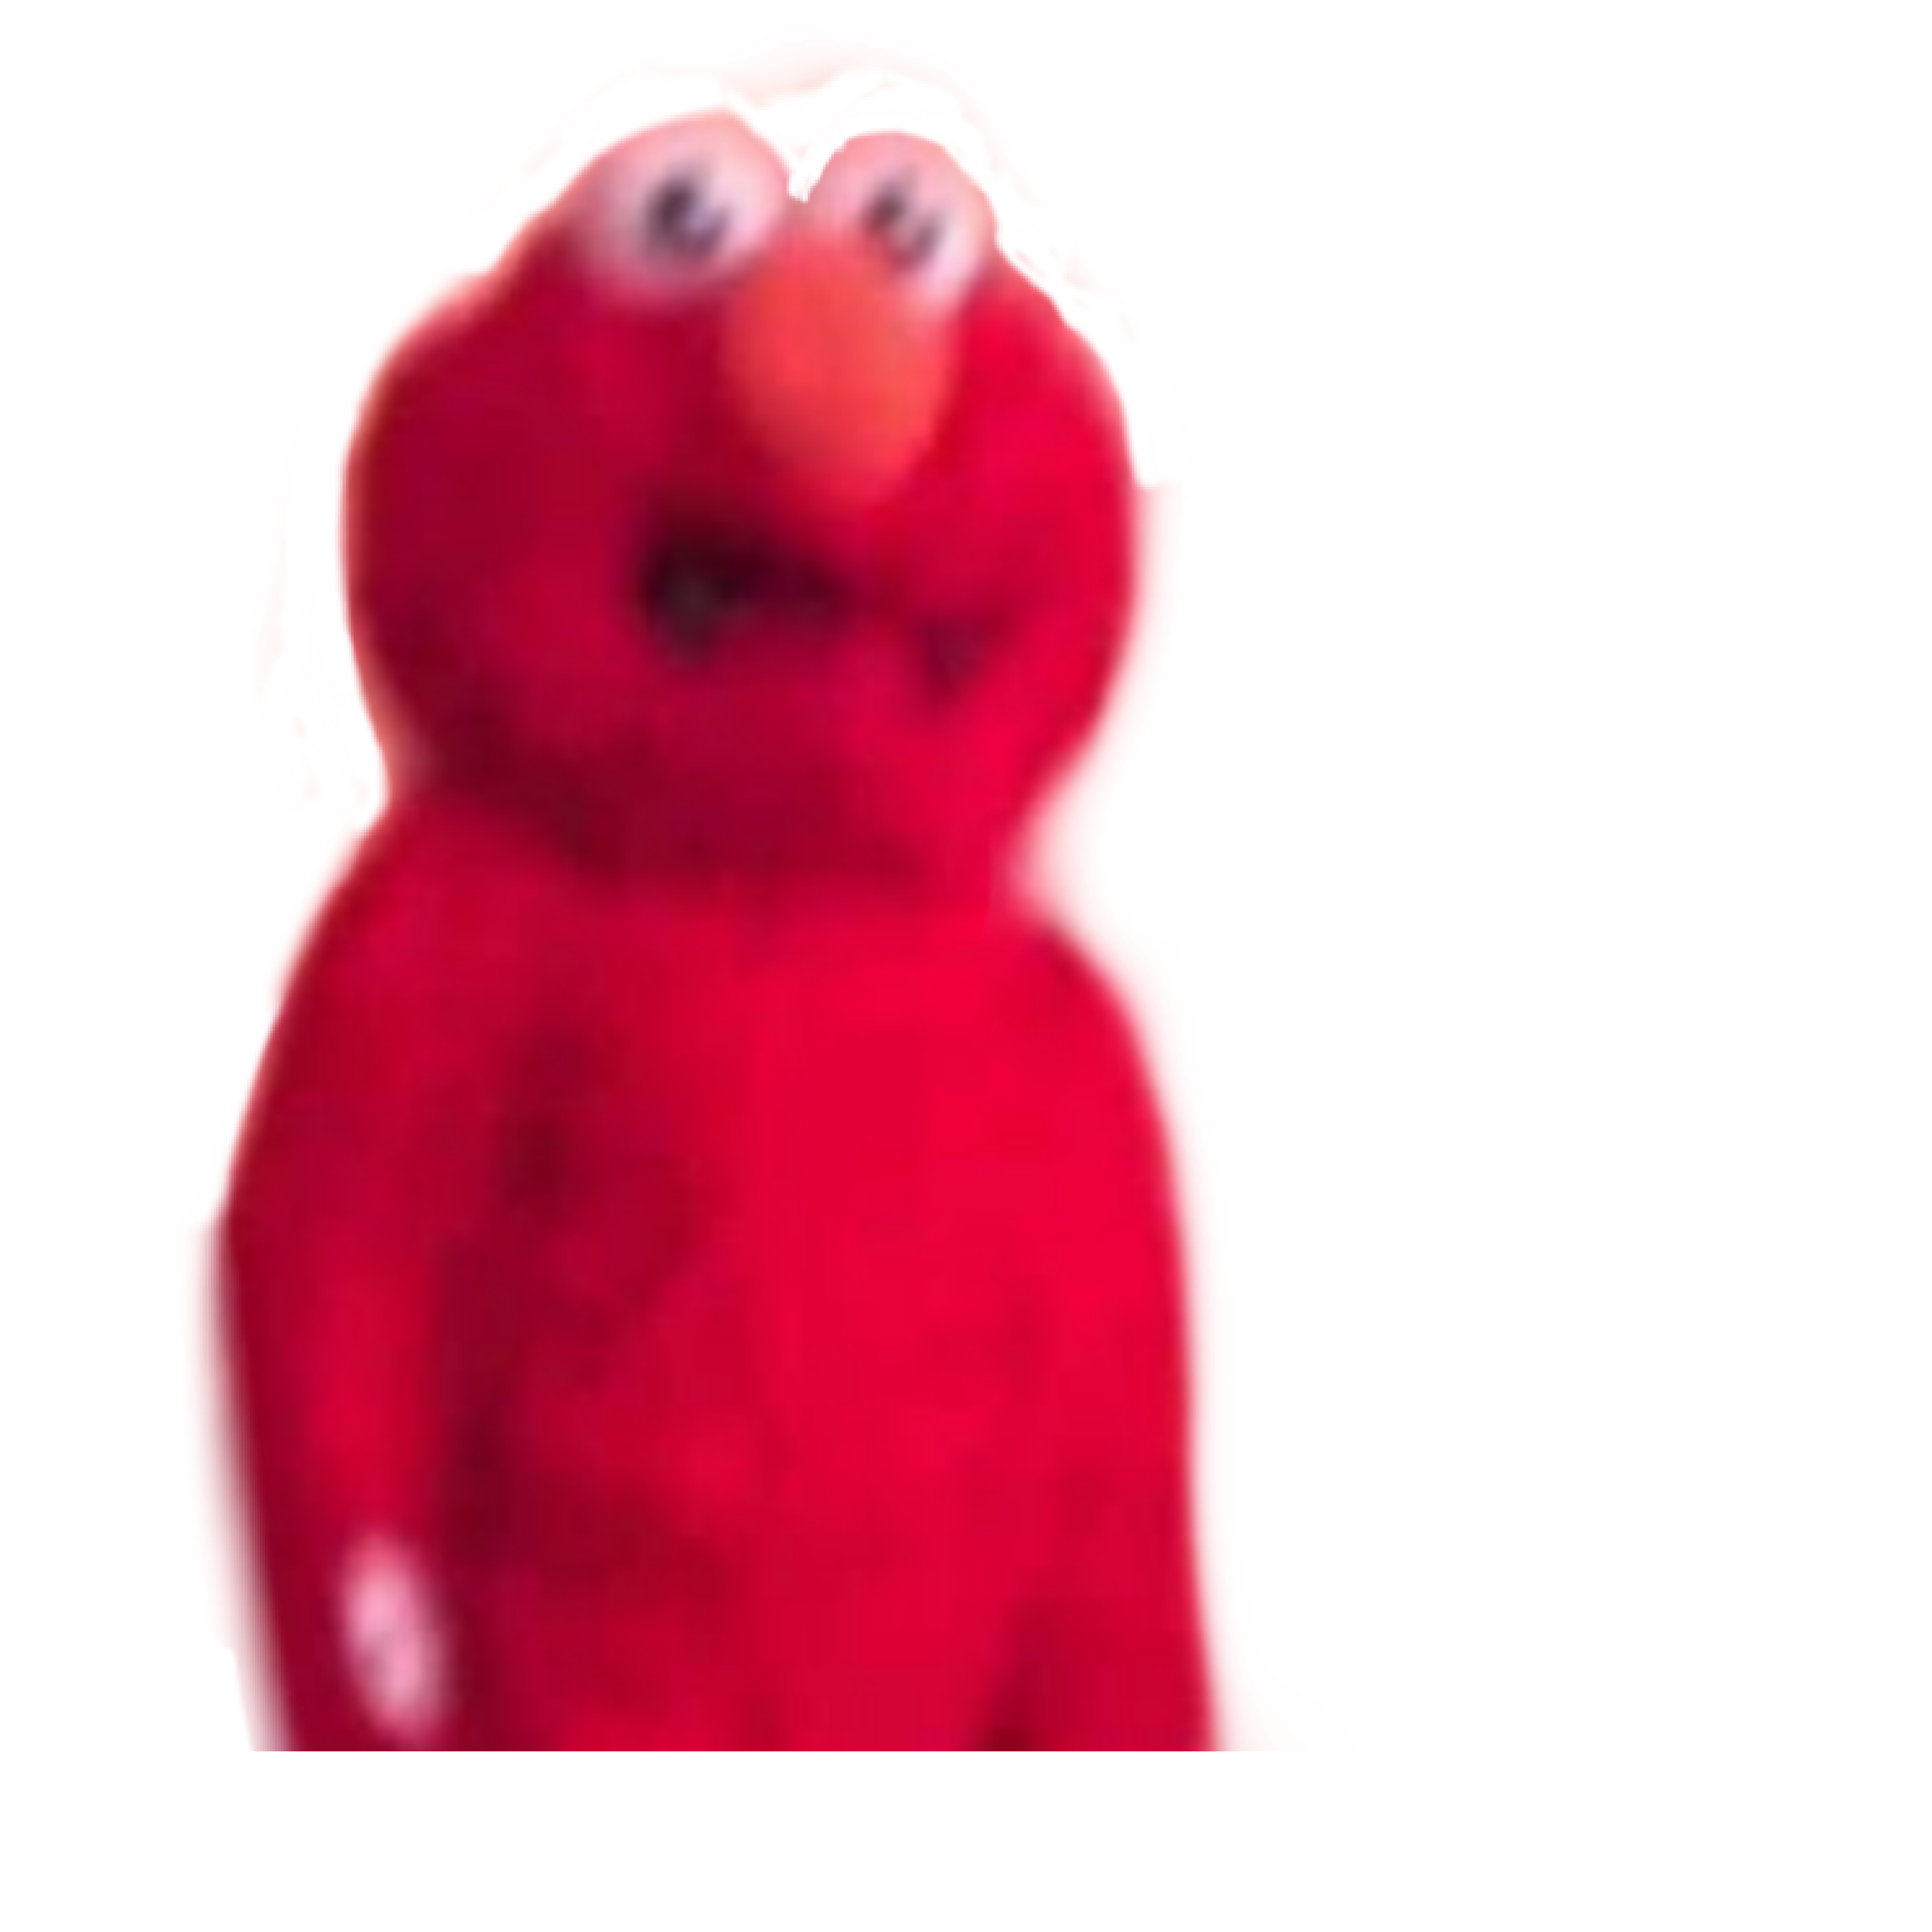 This visual is about elmo triggered idk freetoedit #elmo #triggered #idk.